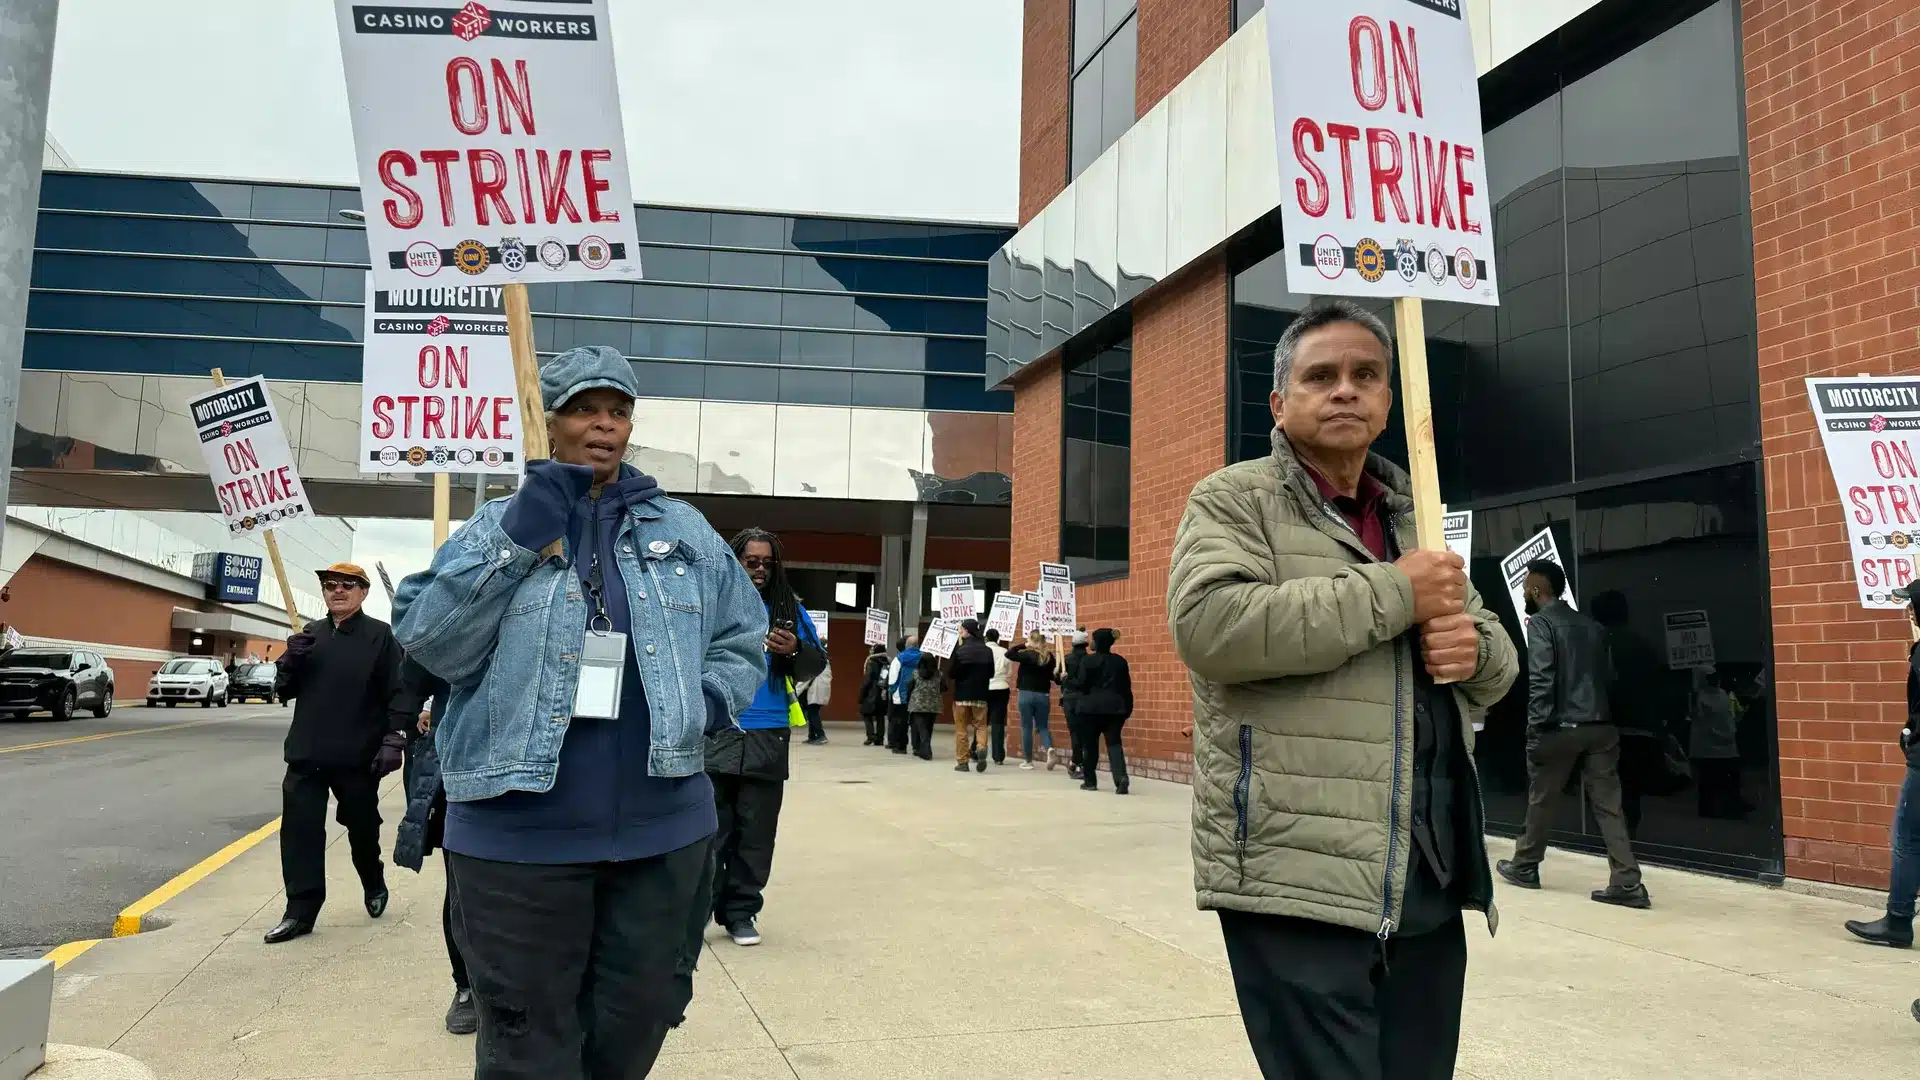 Detroit casino workers on the picket line.